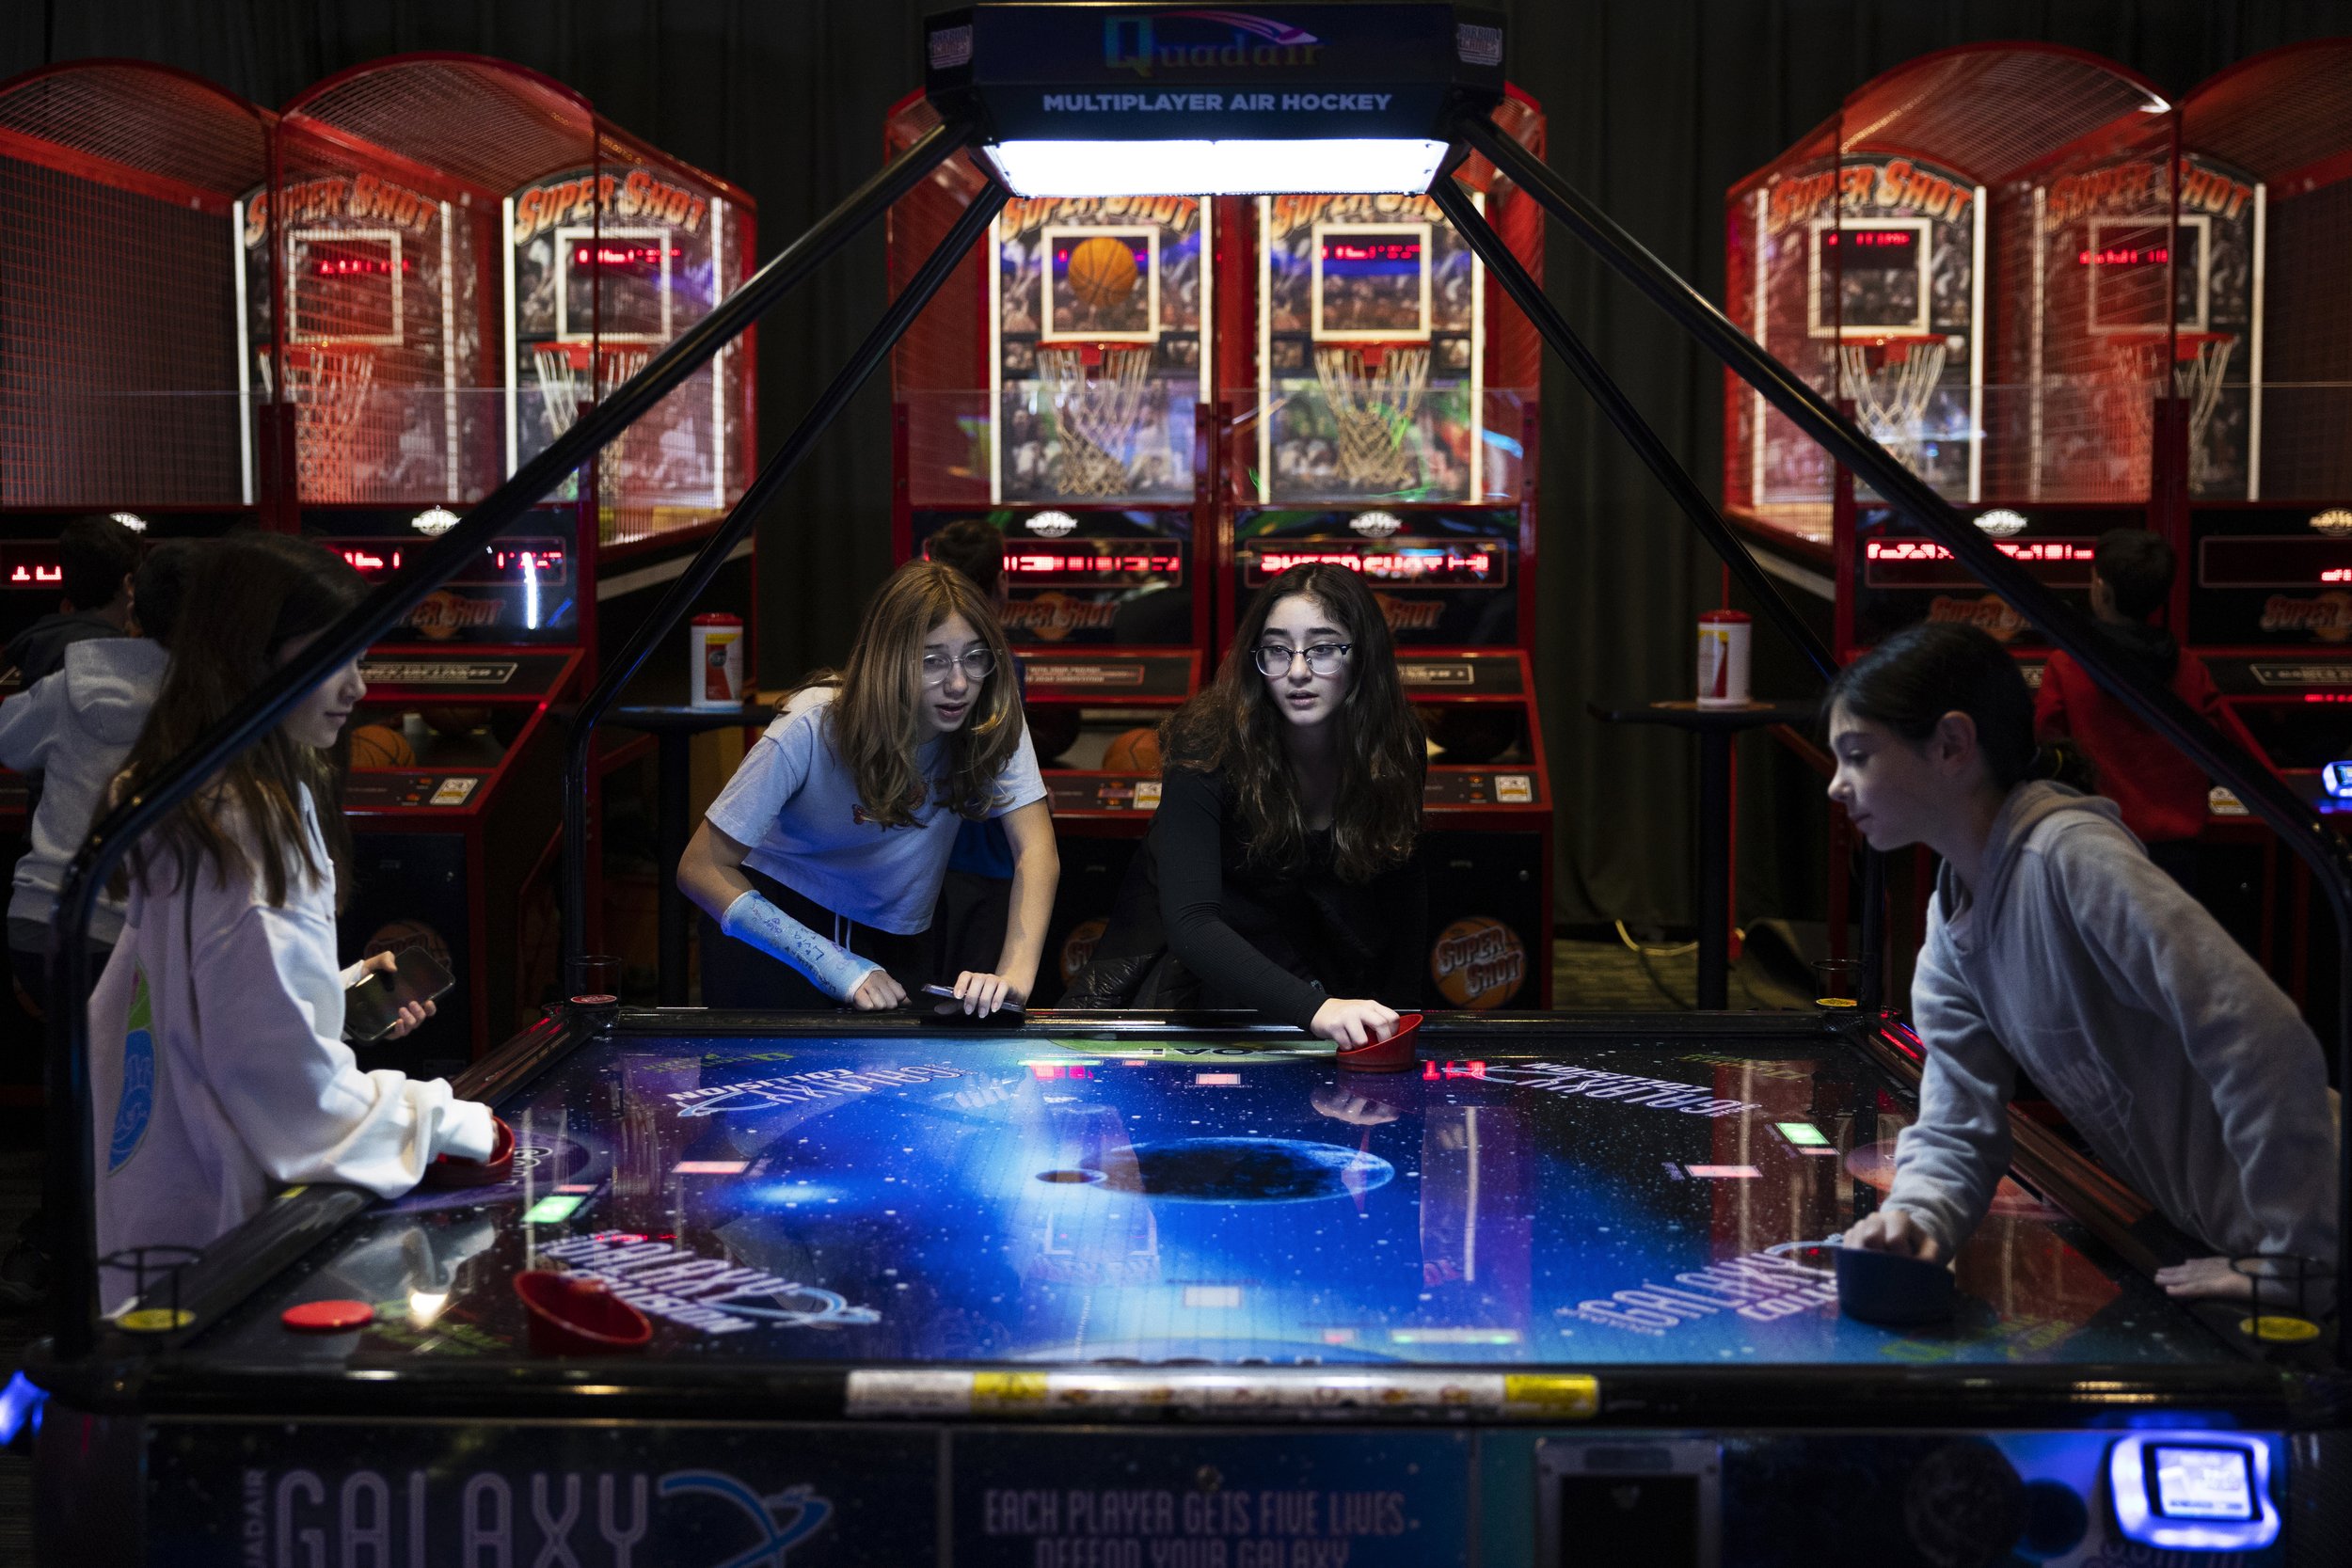  Carly Kreisler (second to left) and Daniella Goldberg (third to left) play air hockey with friends at the camp reunion at Dave and Busters in Palisades, New Jersey on November 27, 2022.  